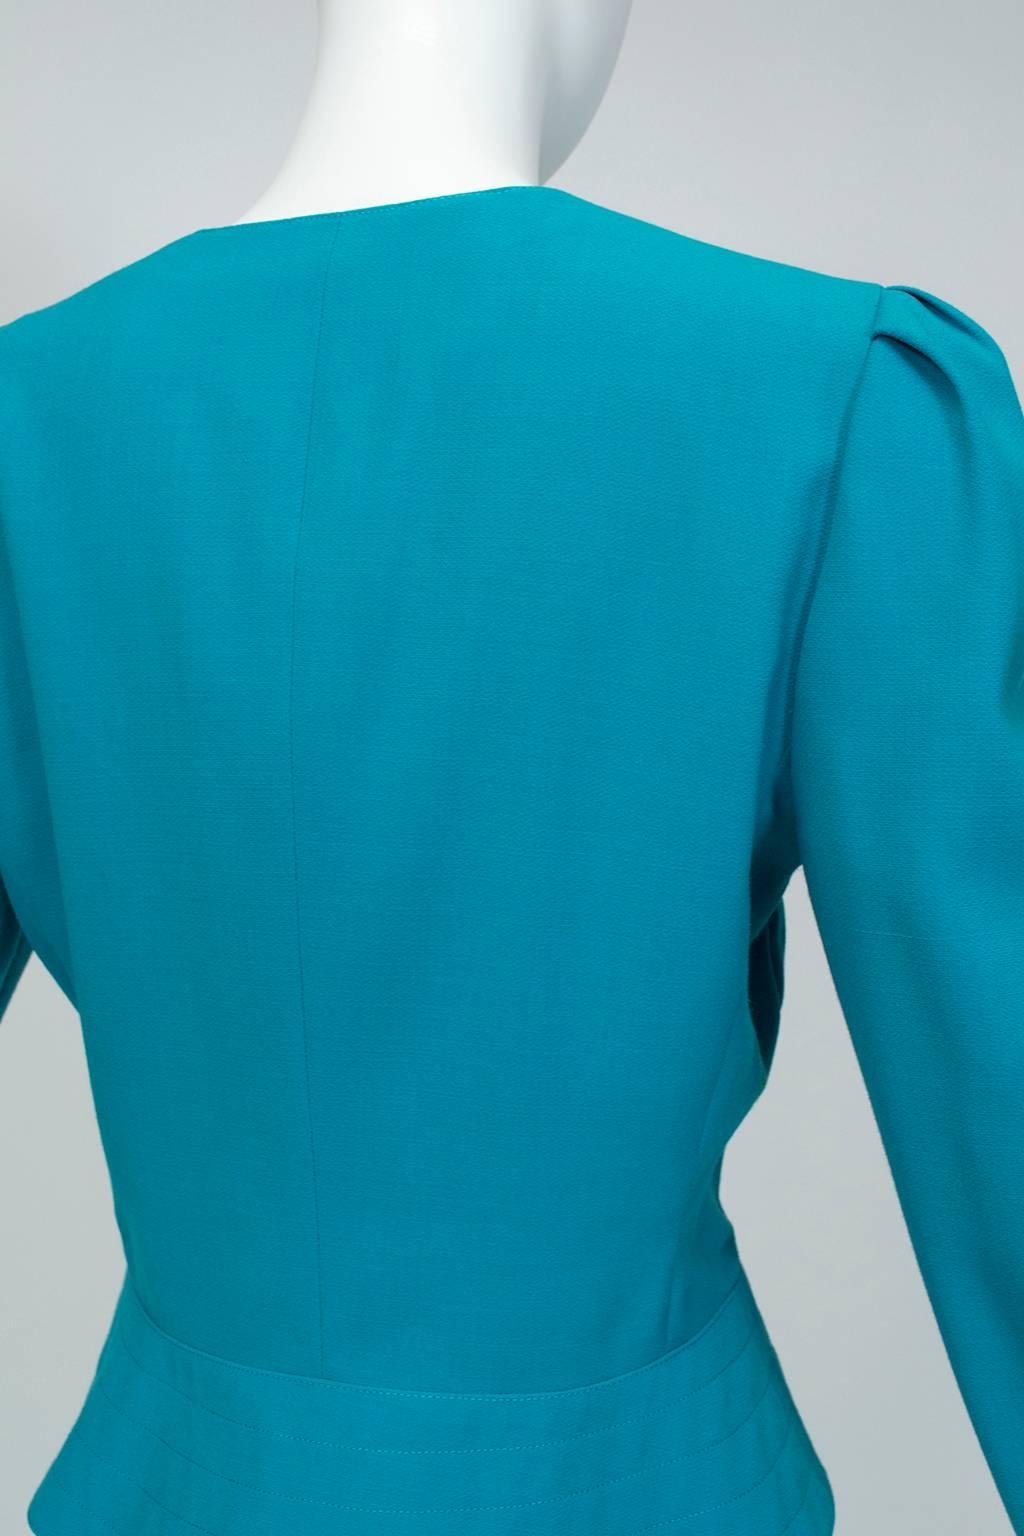 Louis Féraud Turquoise Knife Pleat Power Skirt Suit w Provenance - US 8, 1980s In Excellent Condition For Sale In Tucson, AZ